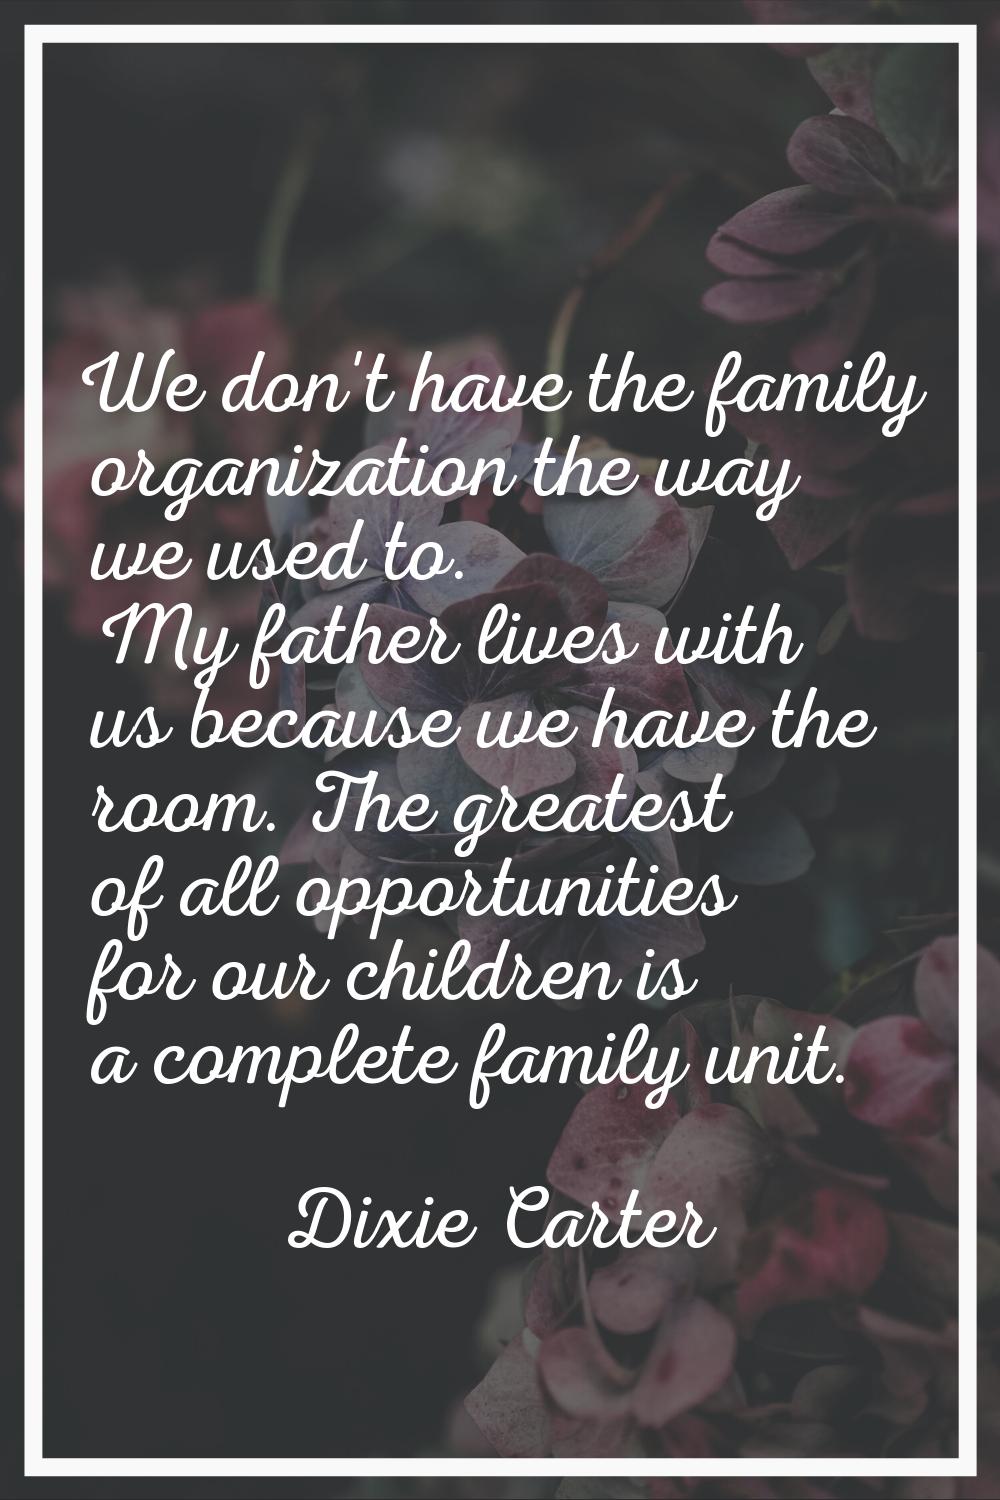 We don't have the family organization the way we used to. My father lives with us because we have t